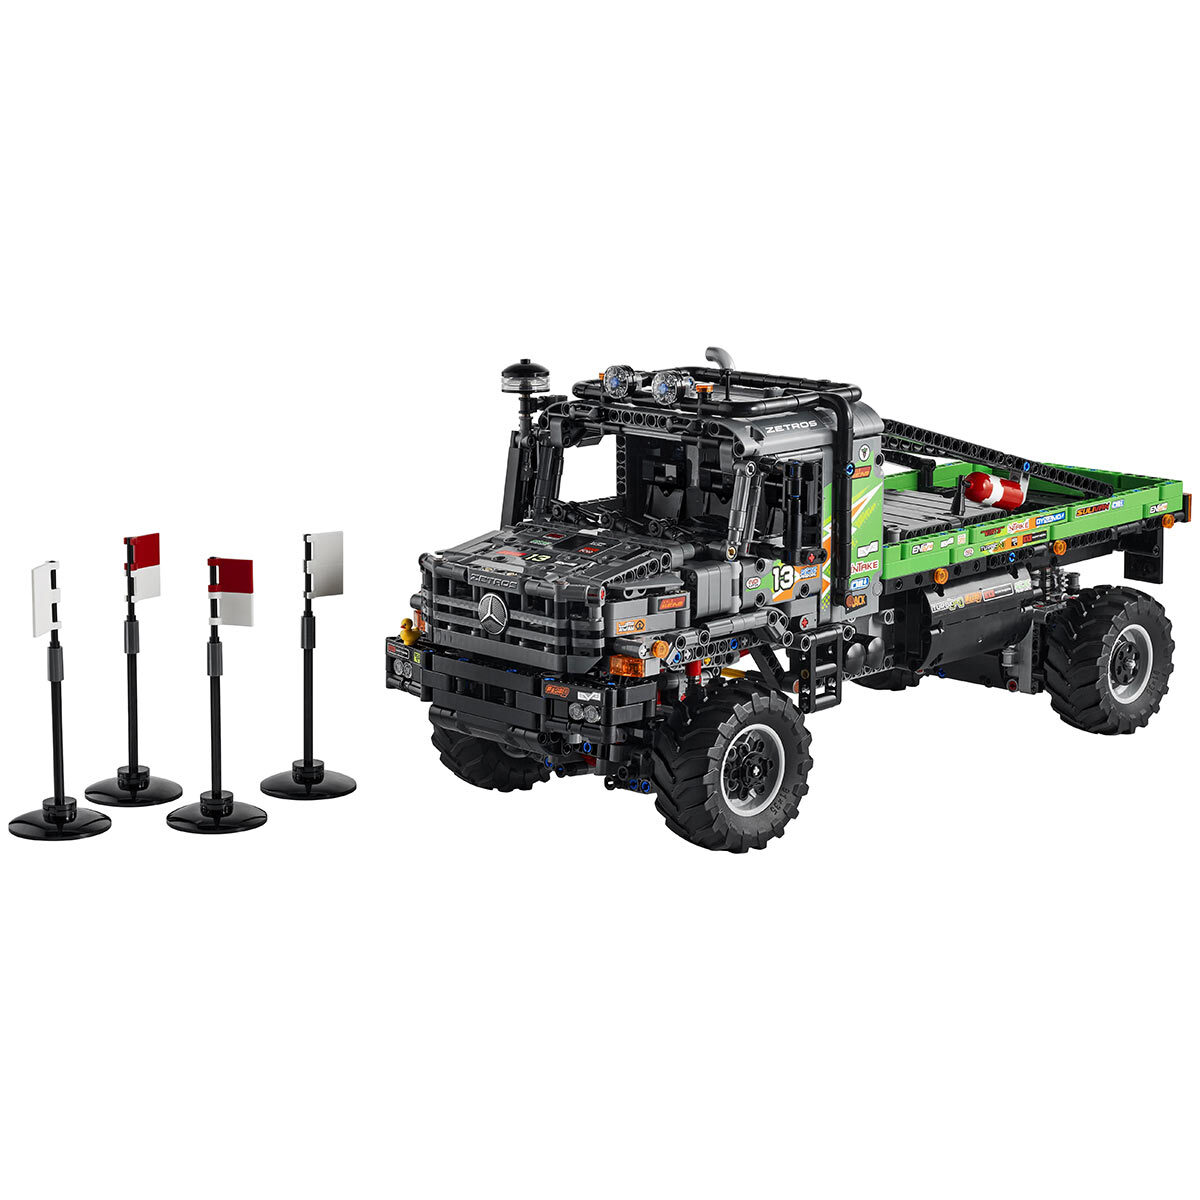 Buy LEGO Technic Mercedes-Benz Zetros Trial Truck Overview Image at Costco.co.uk